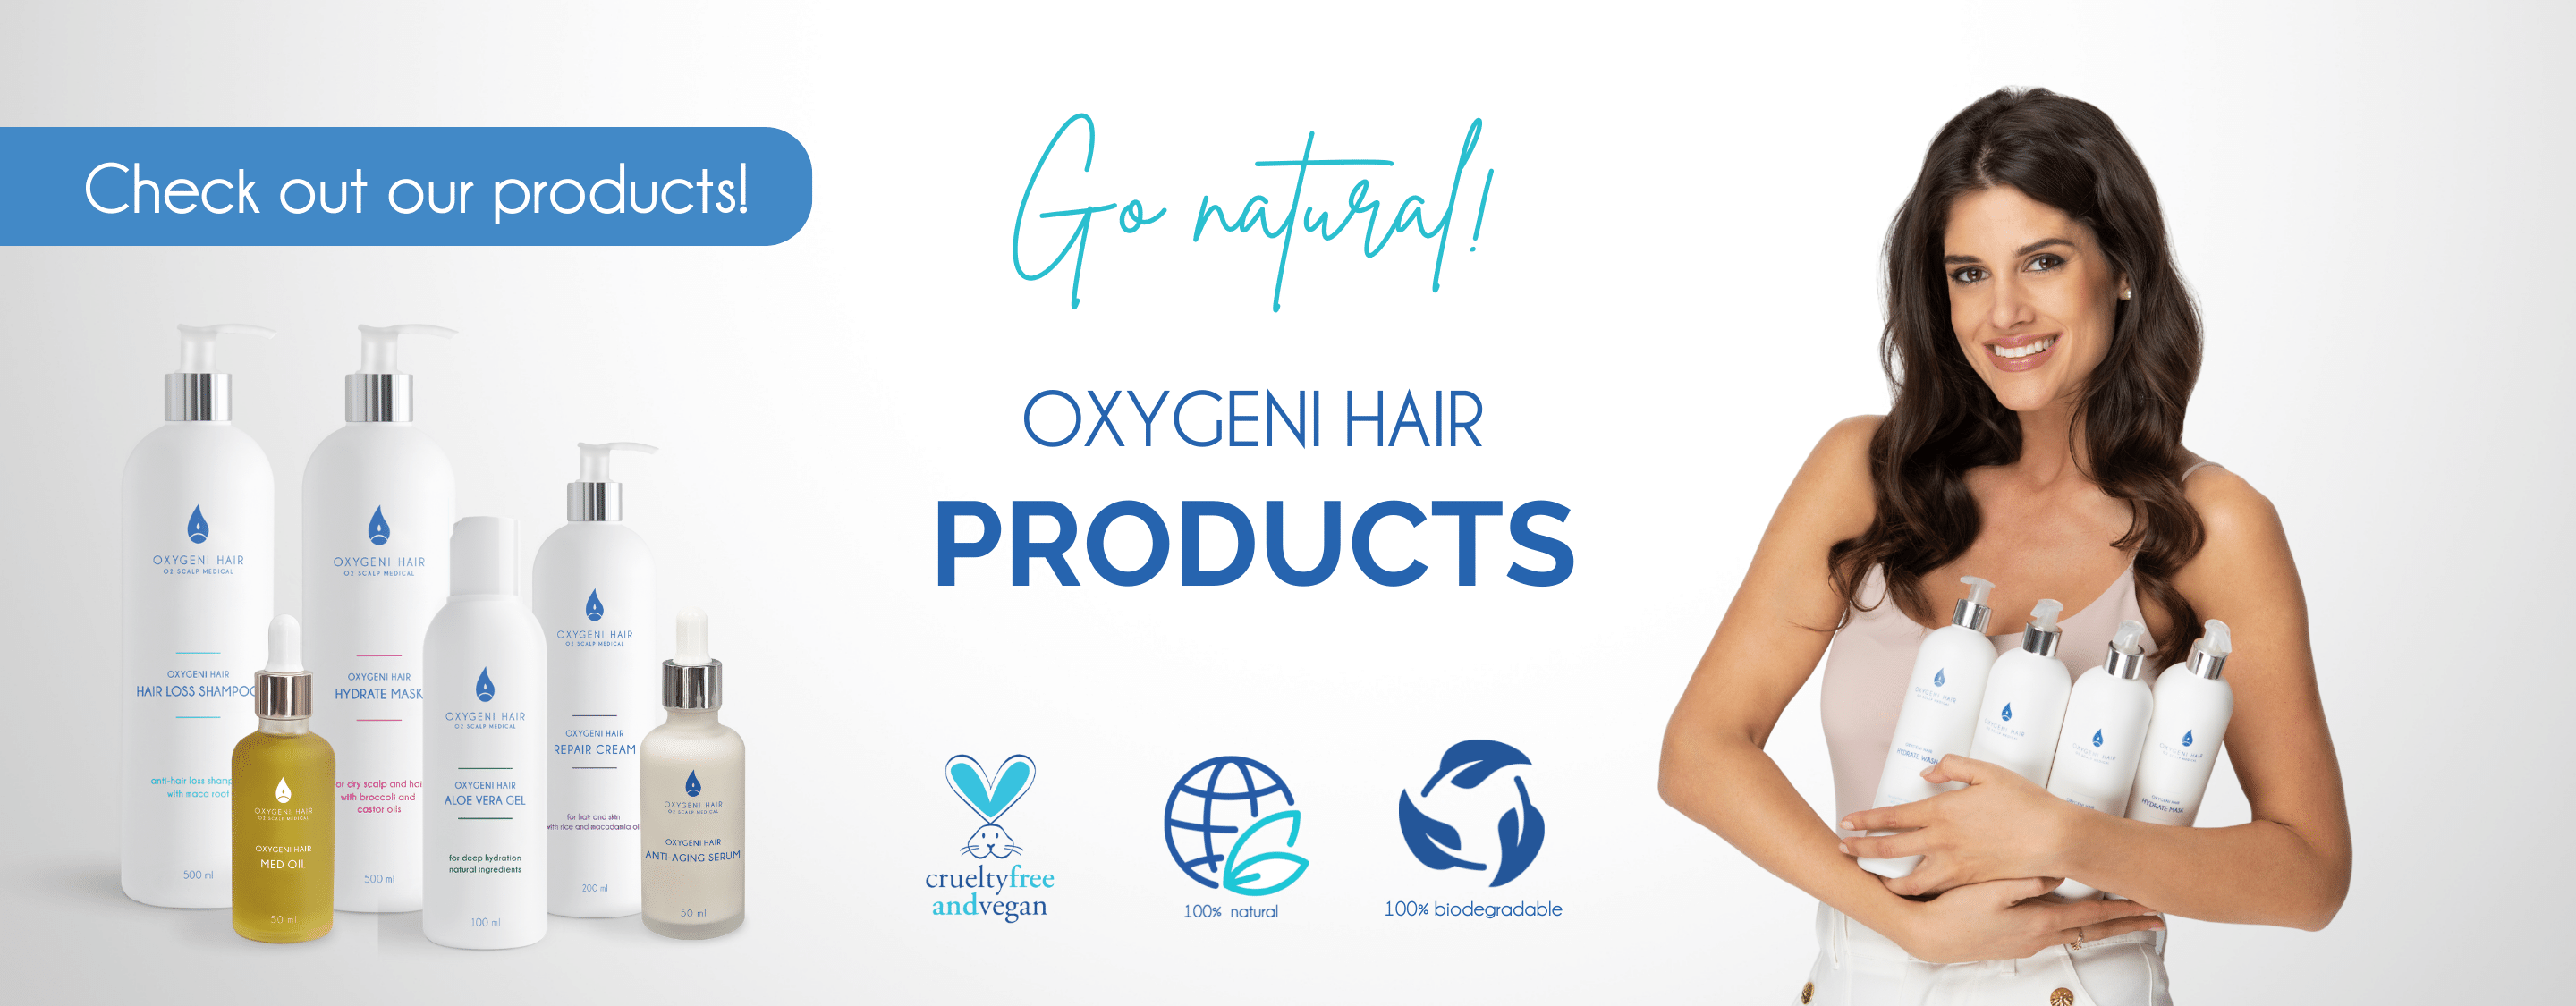 oxygeni hair products